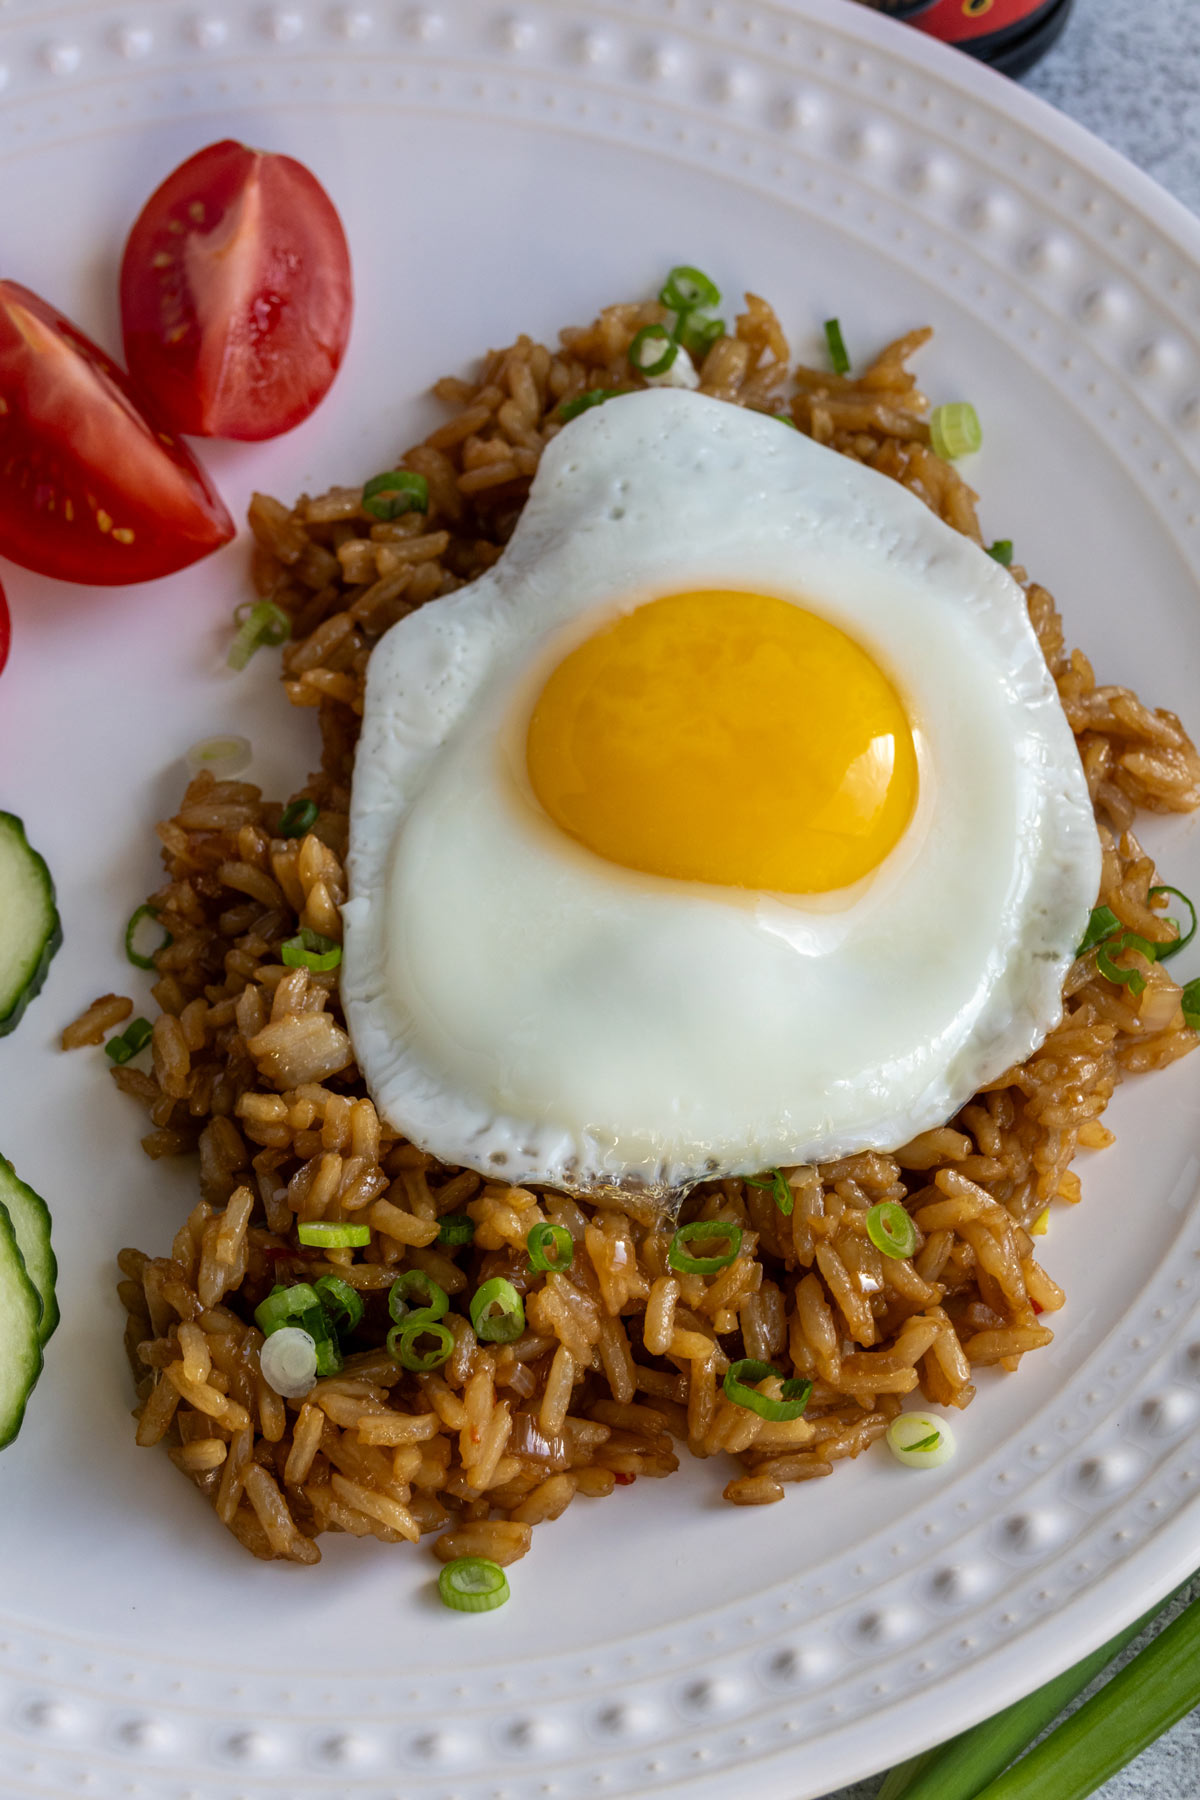 Fried rice topped with sliced scallions and a fried egg on a white plate.